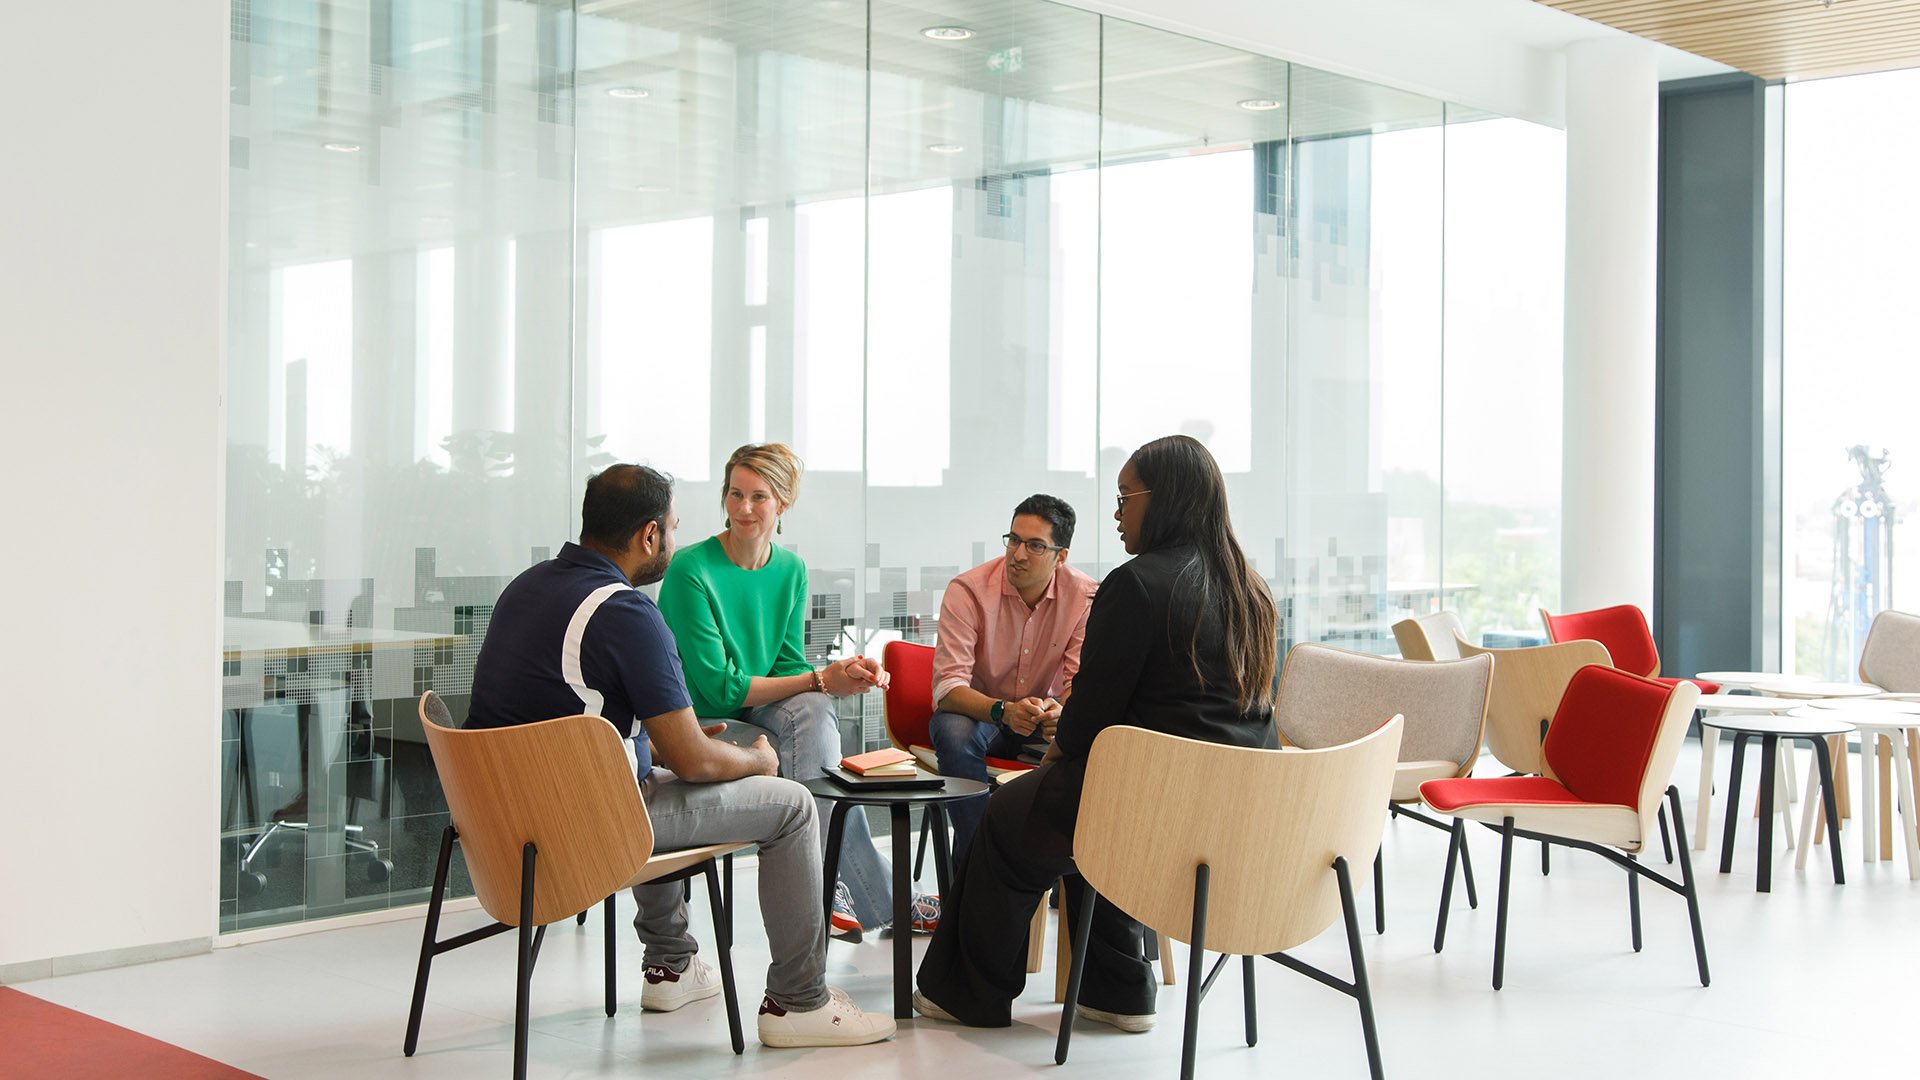 A diverse group of 4 people sit around a table in ASML Building 6 in Veldhoven, the Netherlands.